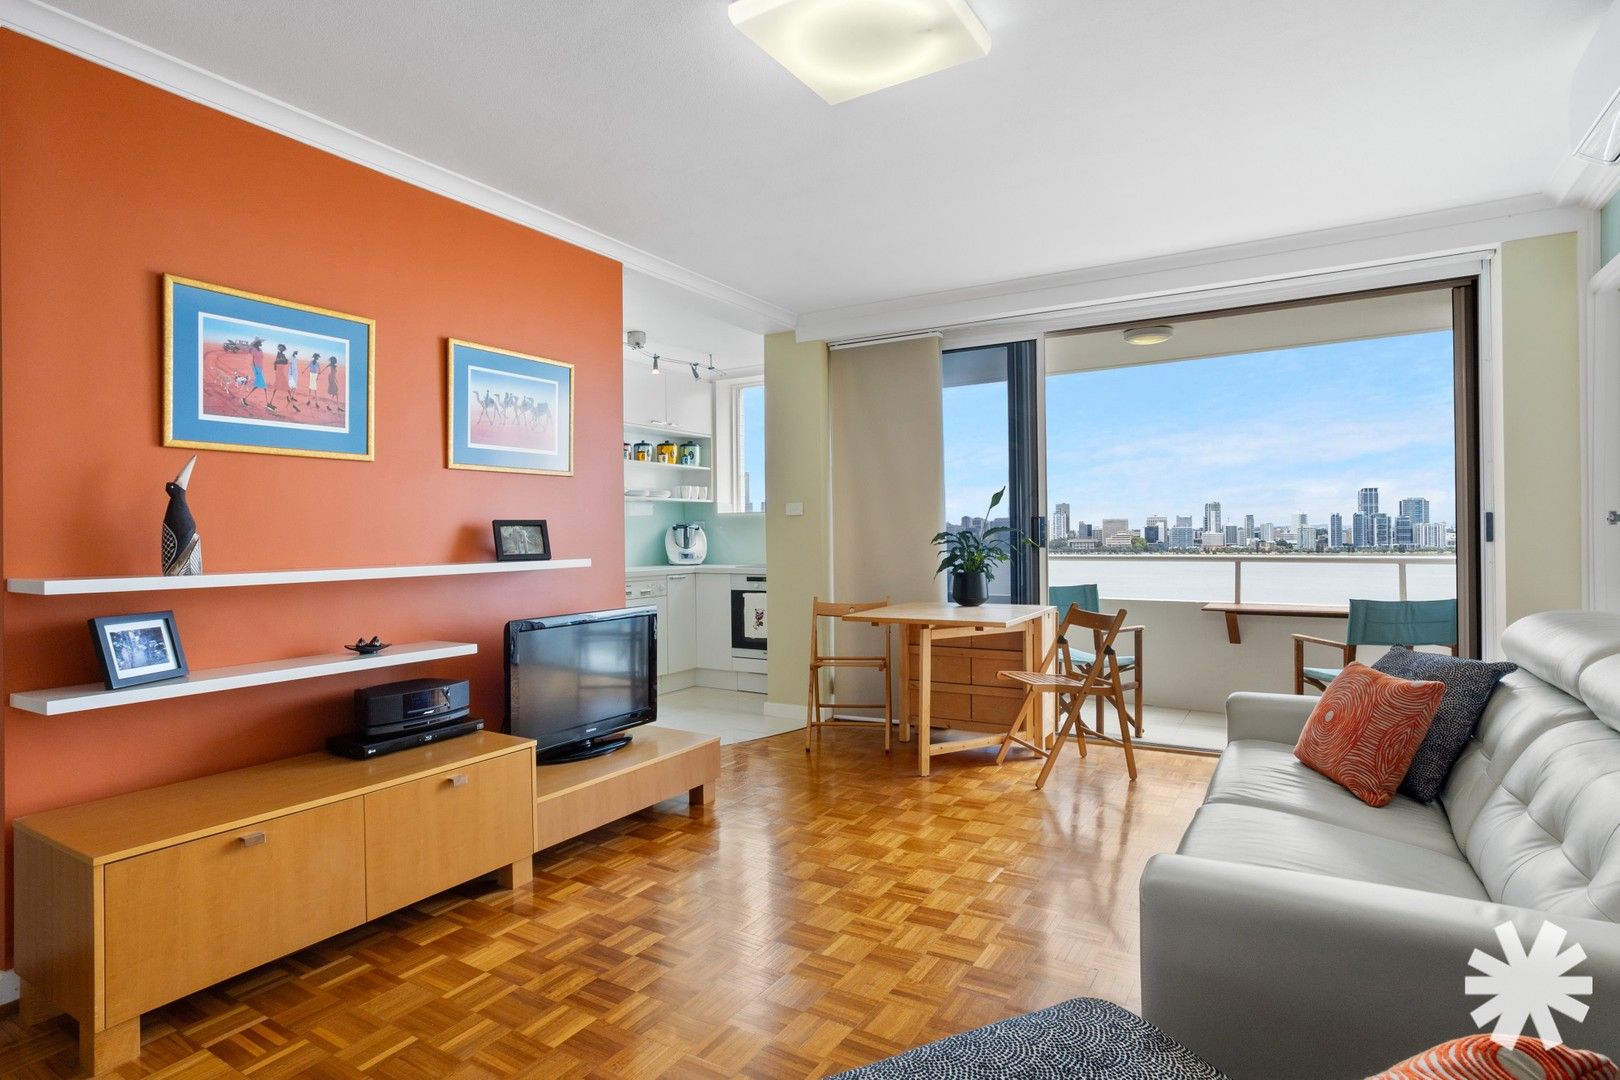 2 bedrooms Apartment / Unit / Flat in 114/154 Mill Point Road SOUTH PERTH WA, 6151